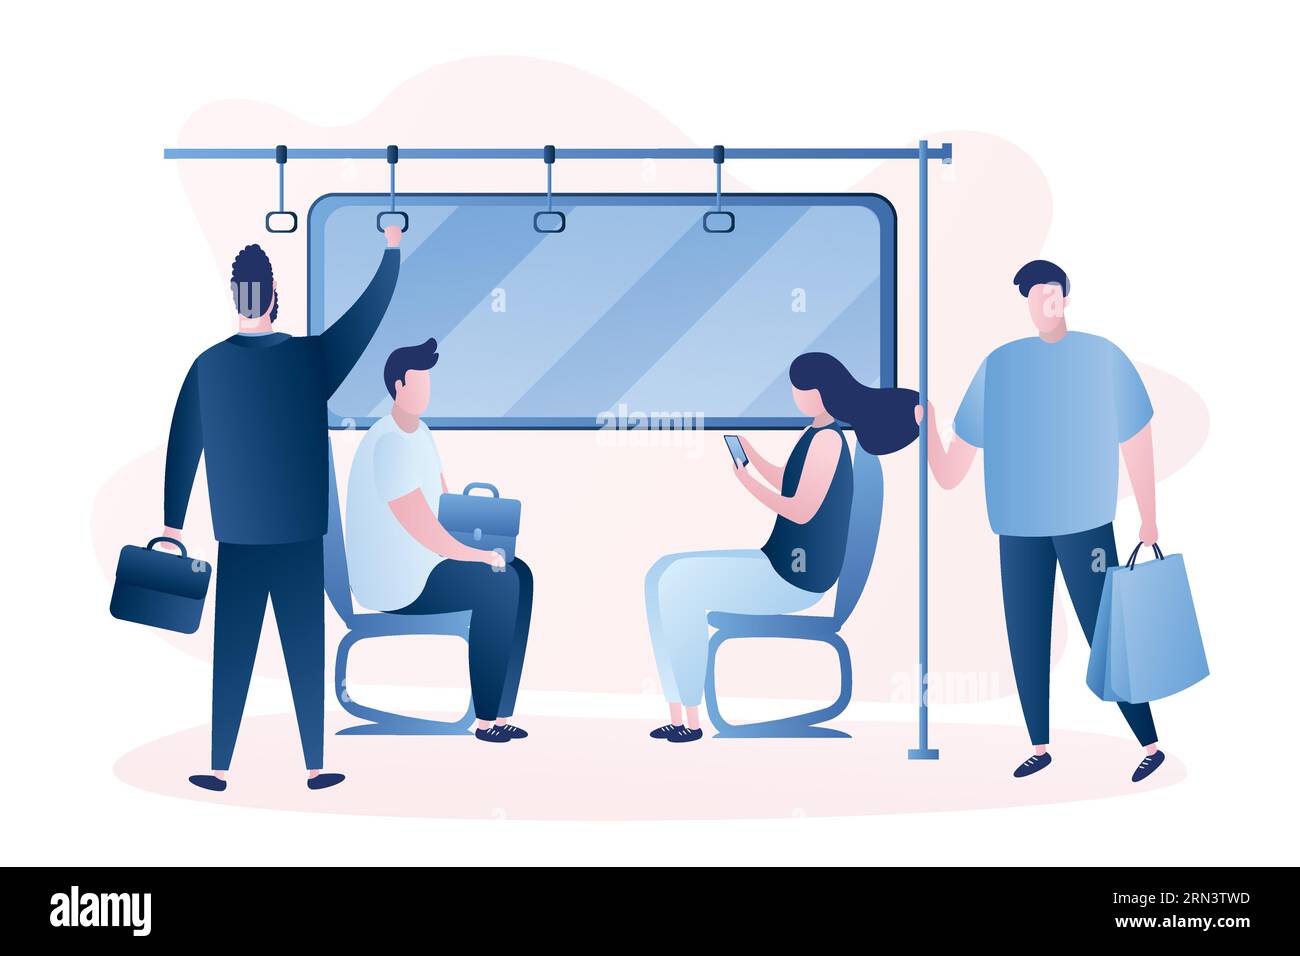 People in the subway. Male and female characters in vatious poses. Humans sitting and standing in metro. People using public transportation. Scene in Stock Vector